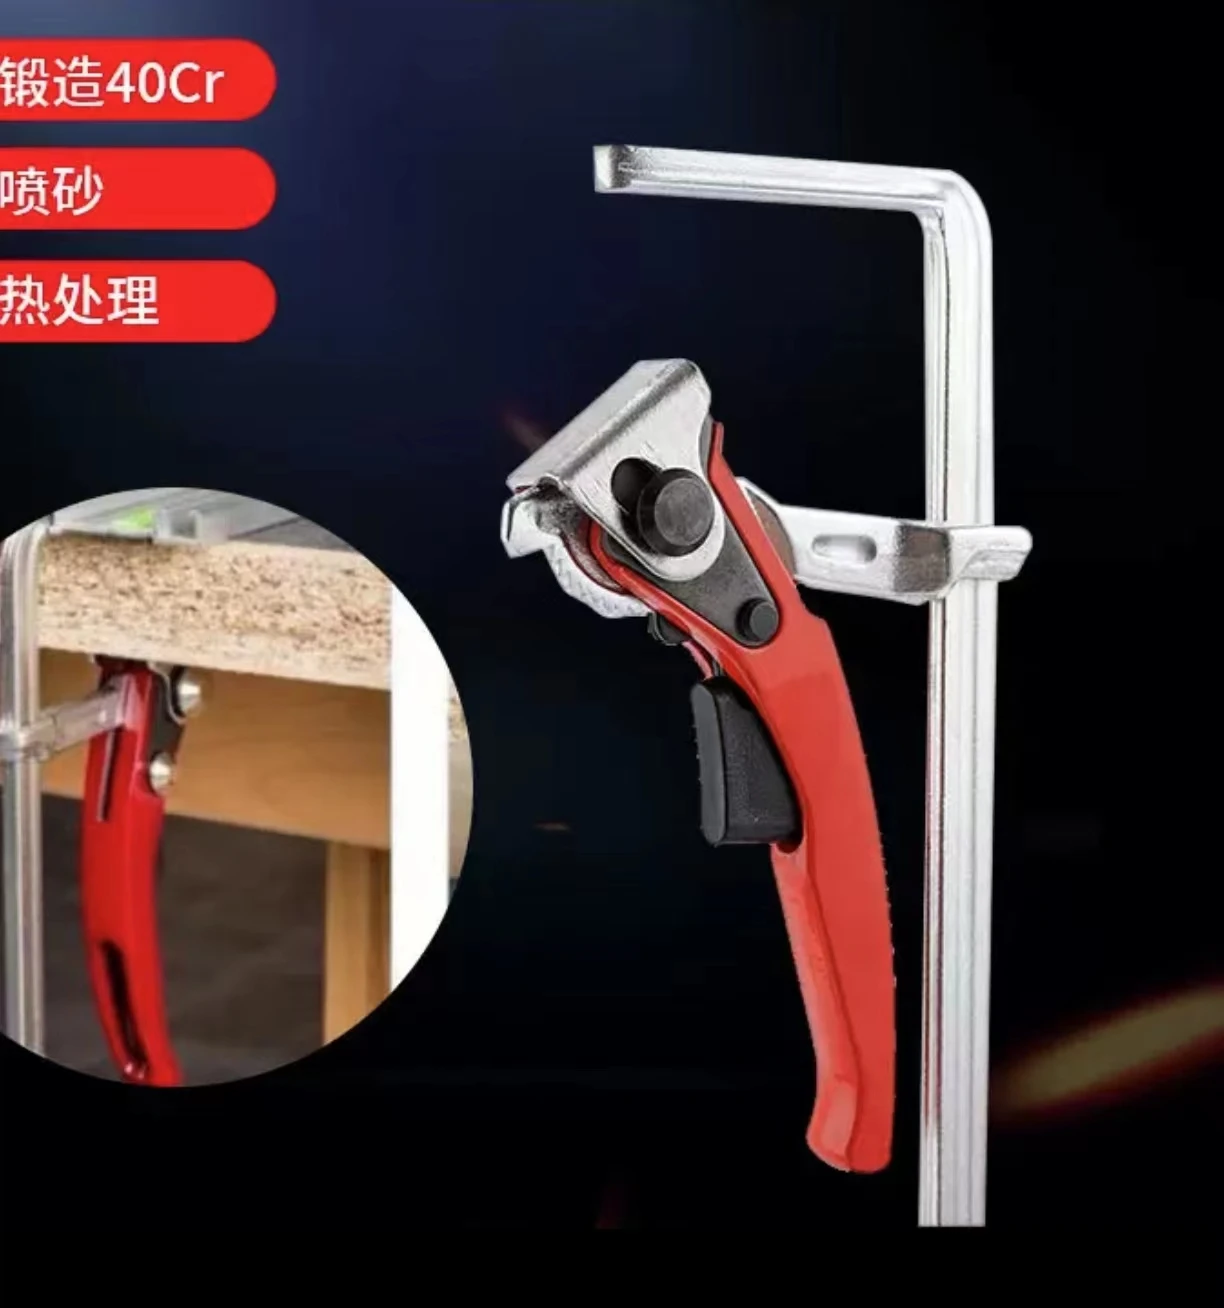 

1Pc MFT Clamp Quick Guide Rail Clamp F Clamp for MFT and Guide Rail System Woodworking DIY 120x60/160x60/200x60/300x60mm